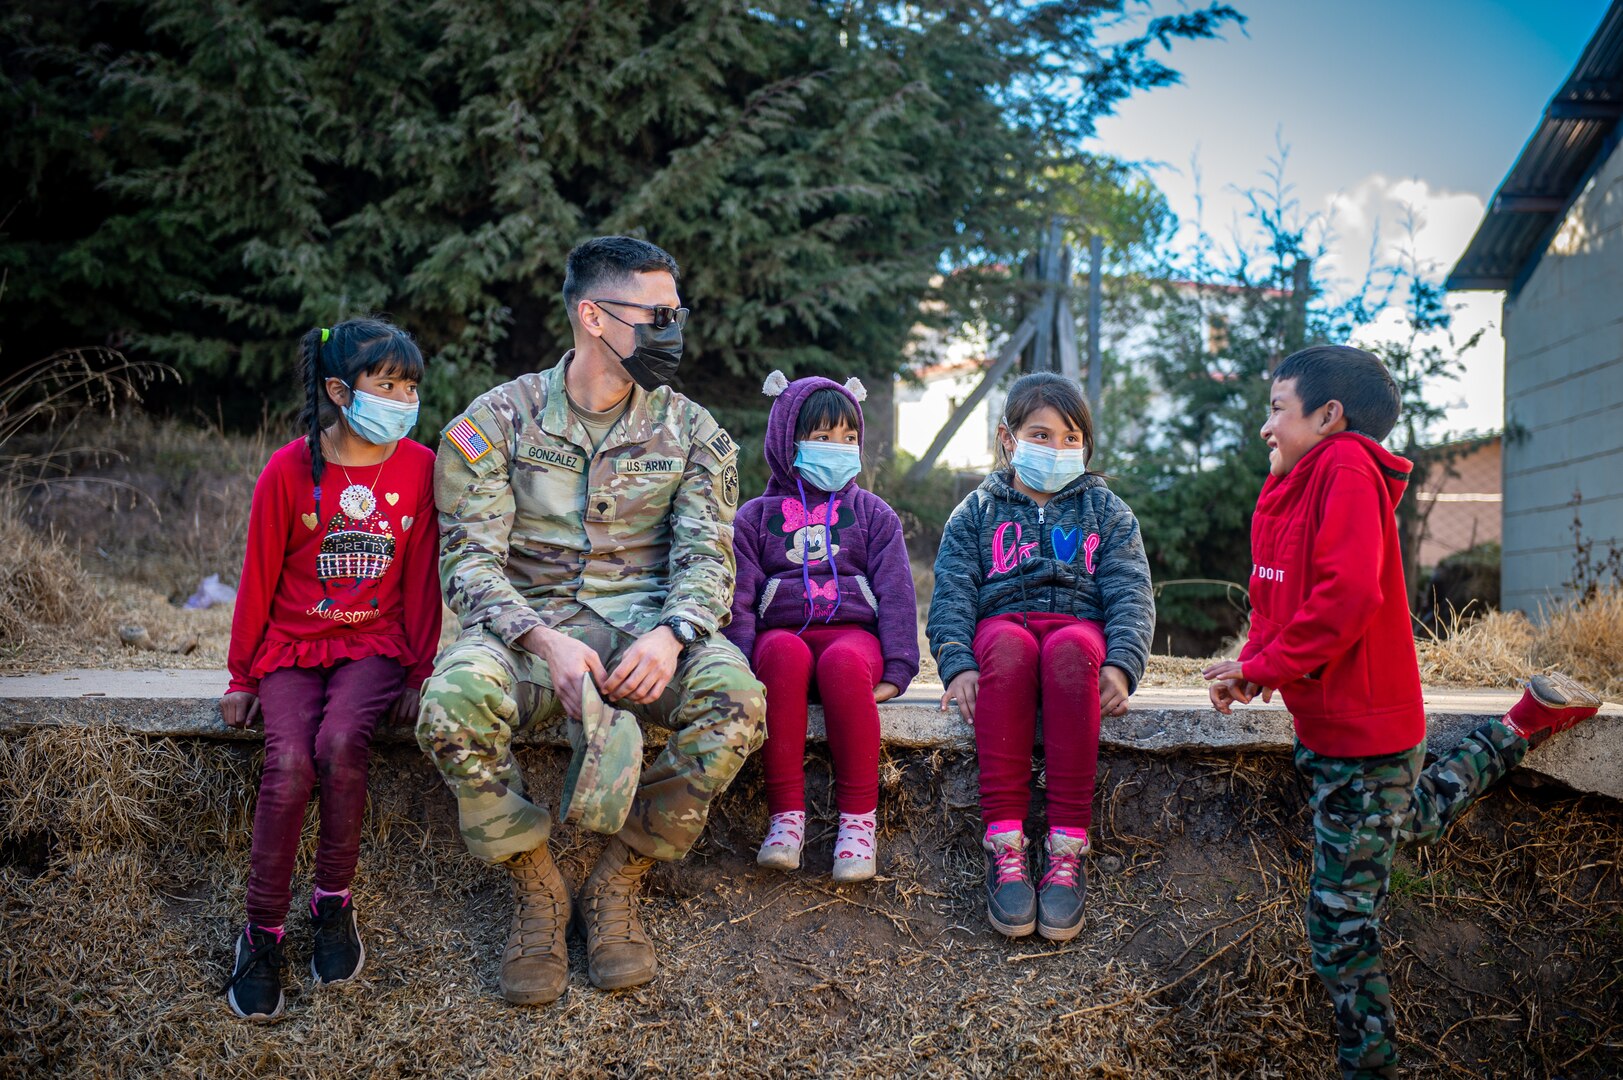 U.S. Army Spc. William Gonzalez, a military policeman with Joint Task Force Bravo, talks with local children during a global health engagement in the Chiantla region of Guatemala, Dec. 13, 2021.